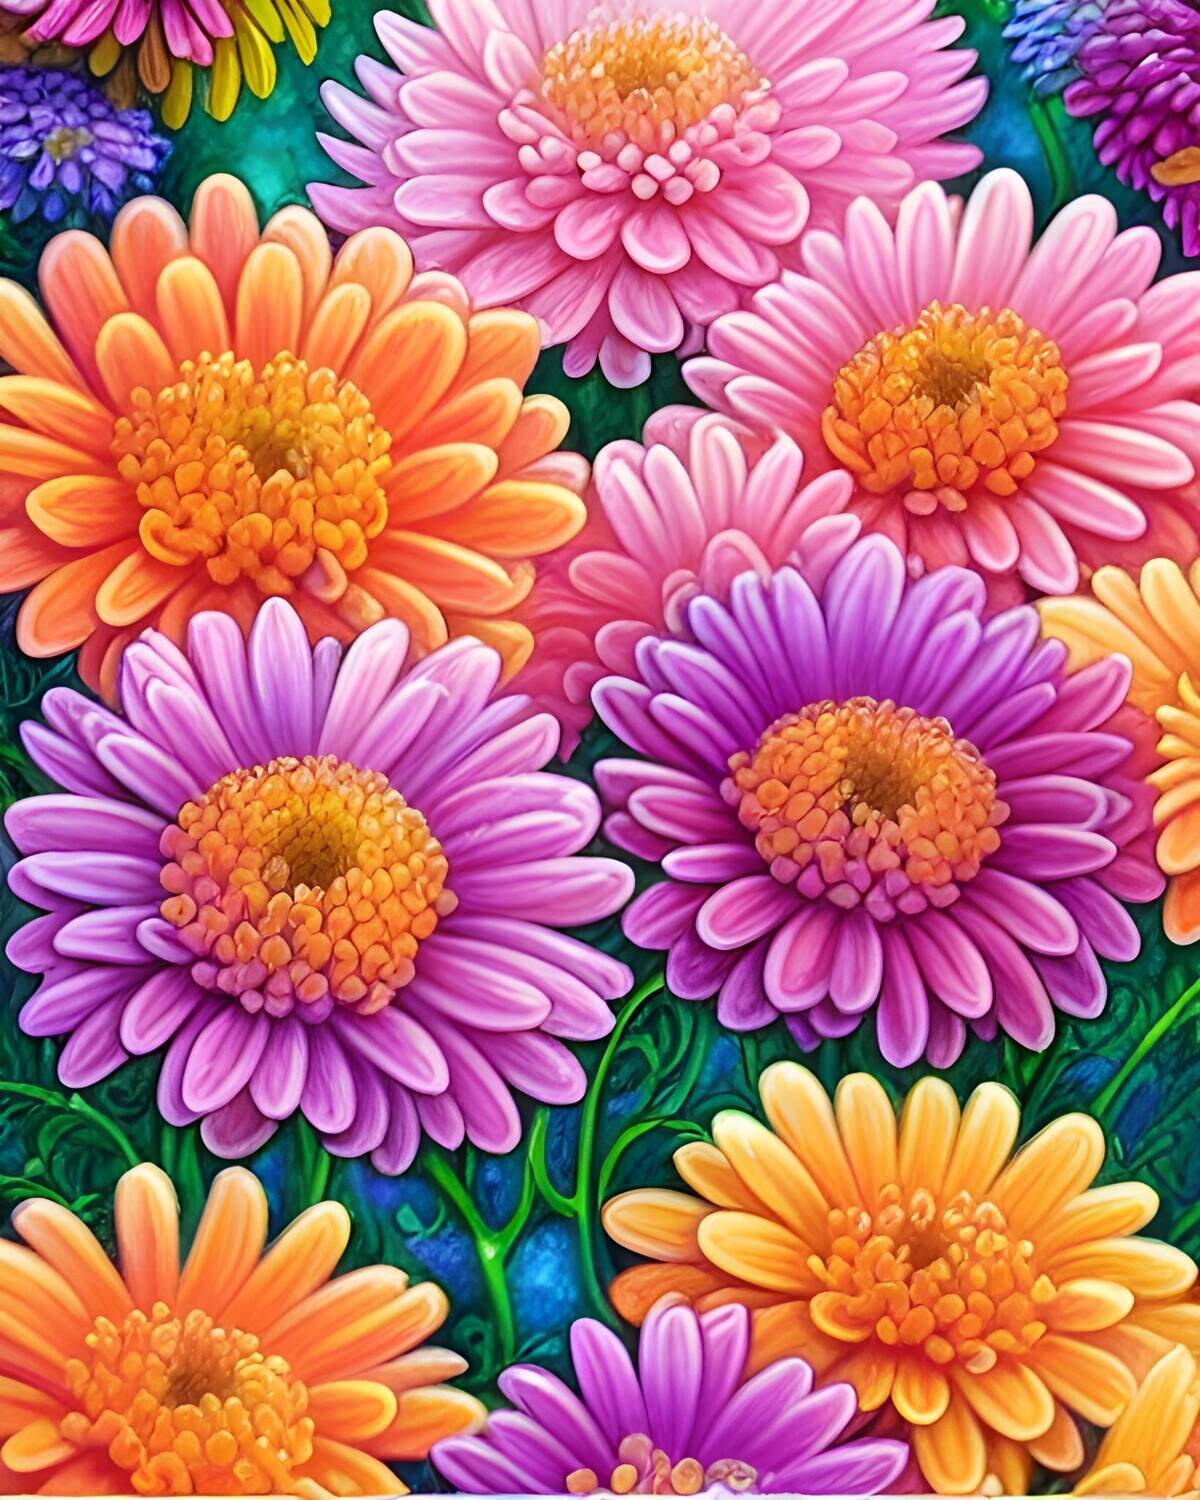 Chrysanthemums C - 30 x 40cm Full Drill (Square) with AB drills - POURED GLUE - Diamond Painting Kit